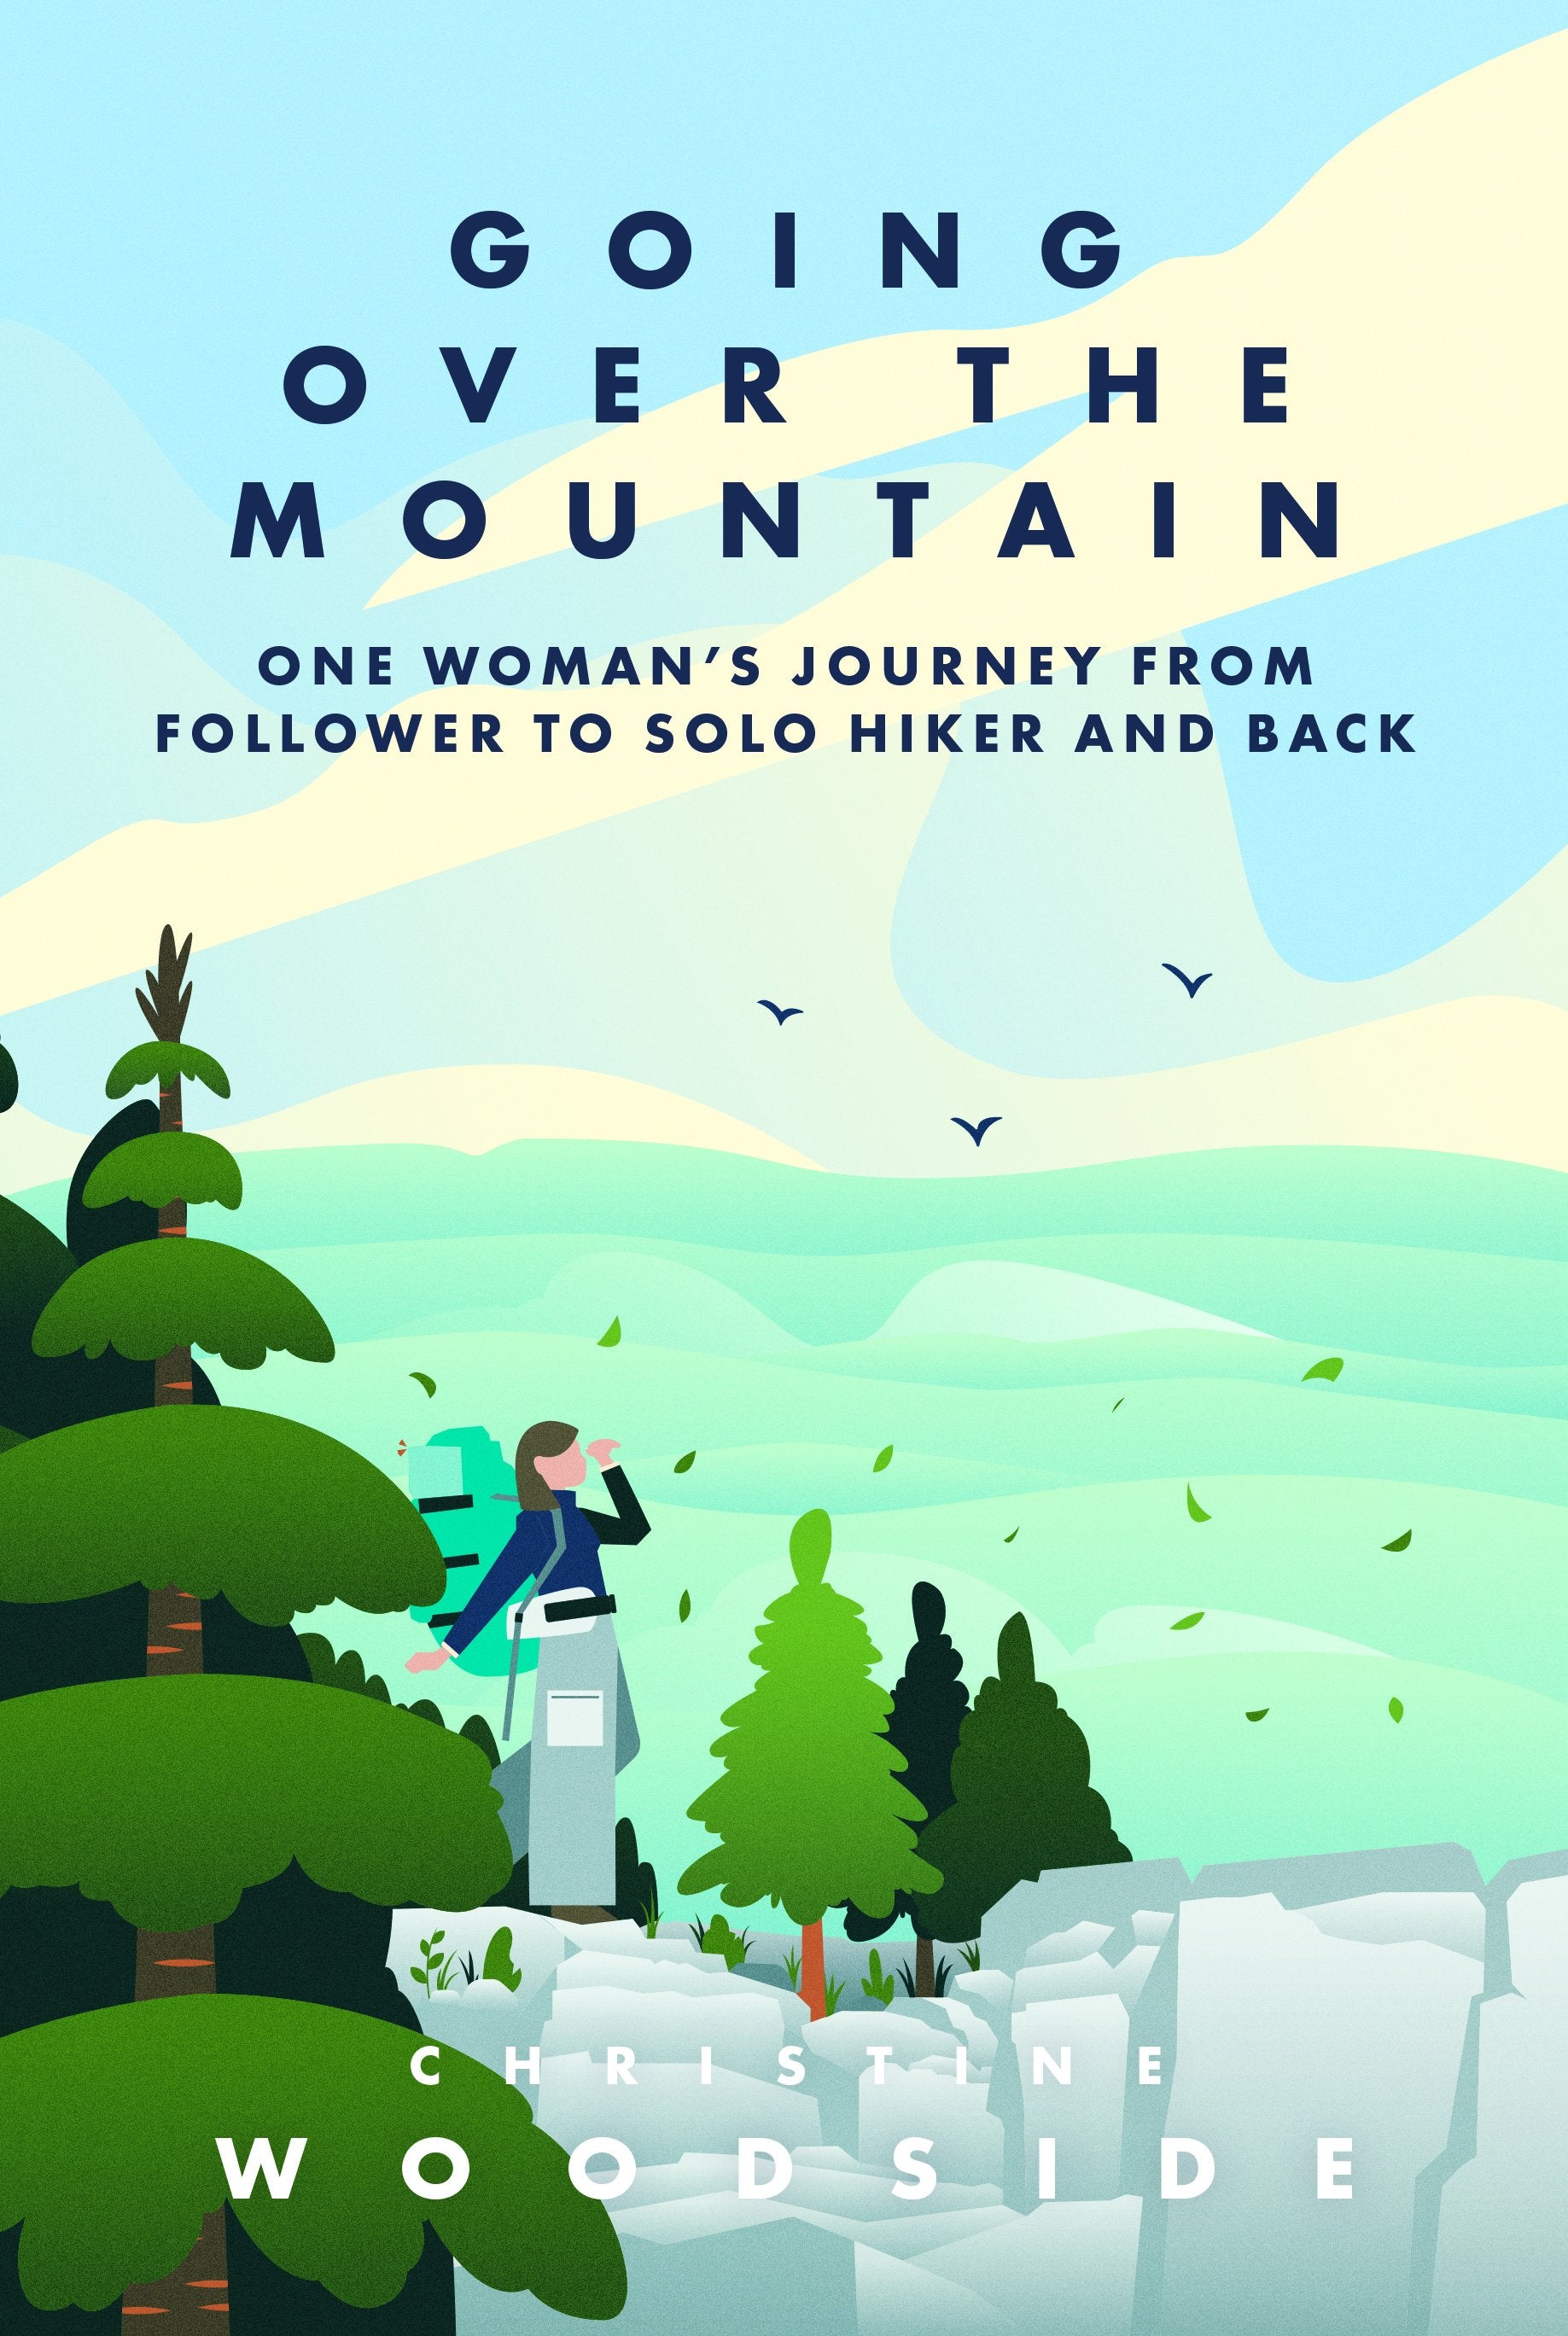 Going Over the Mountain: One Woman's Journey from Follower to Solo Hiker and Back